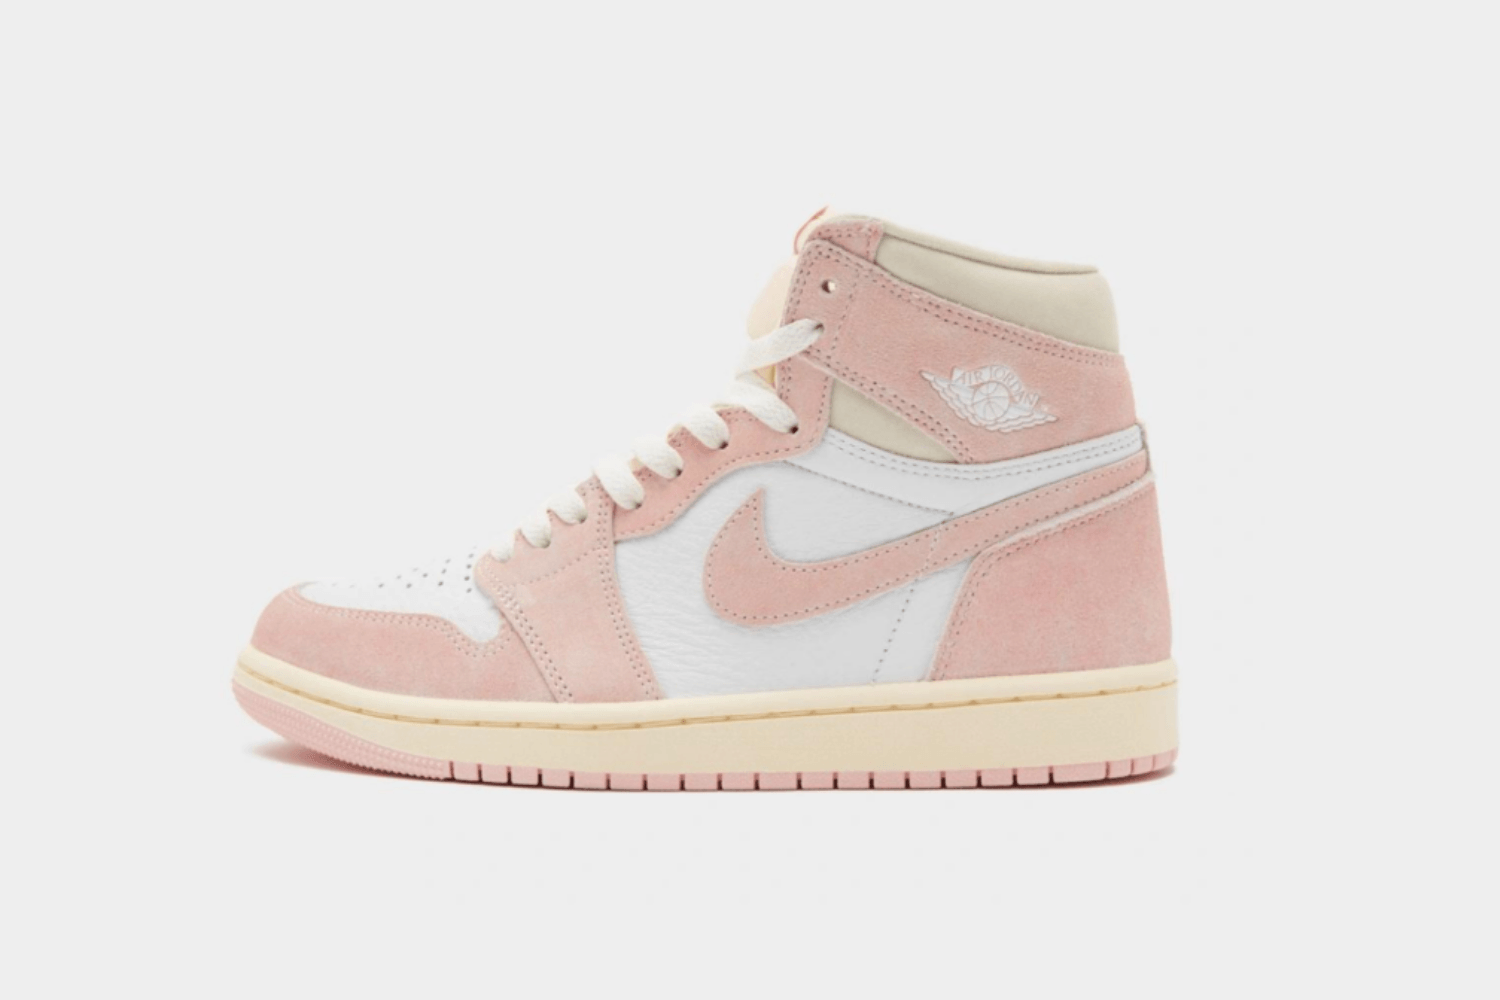 A first look at the Air Jordan 1 WMNS 'Washed Pink'